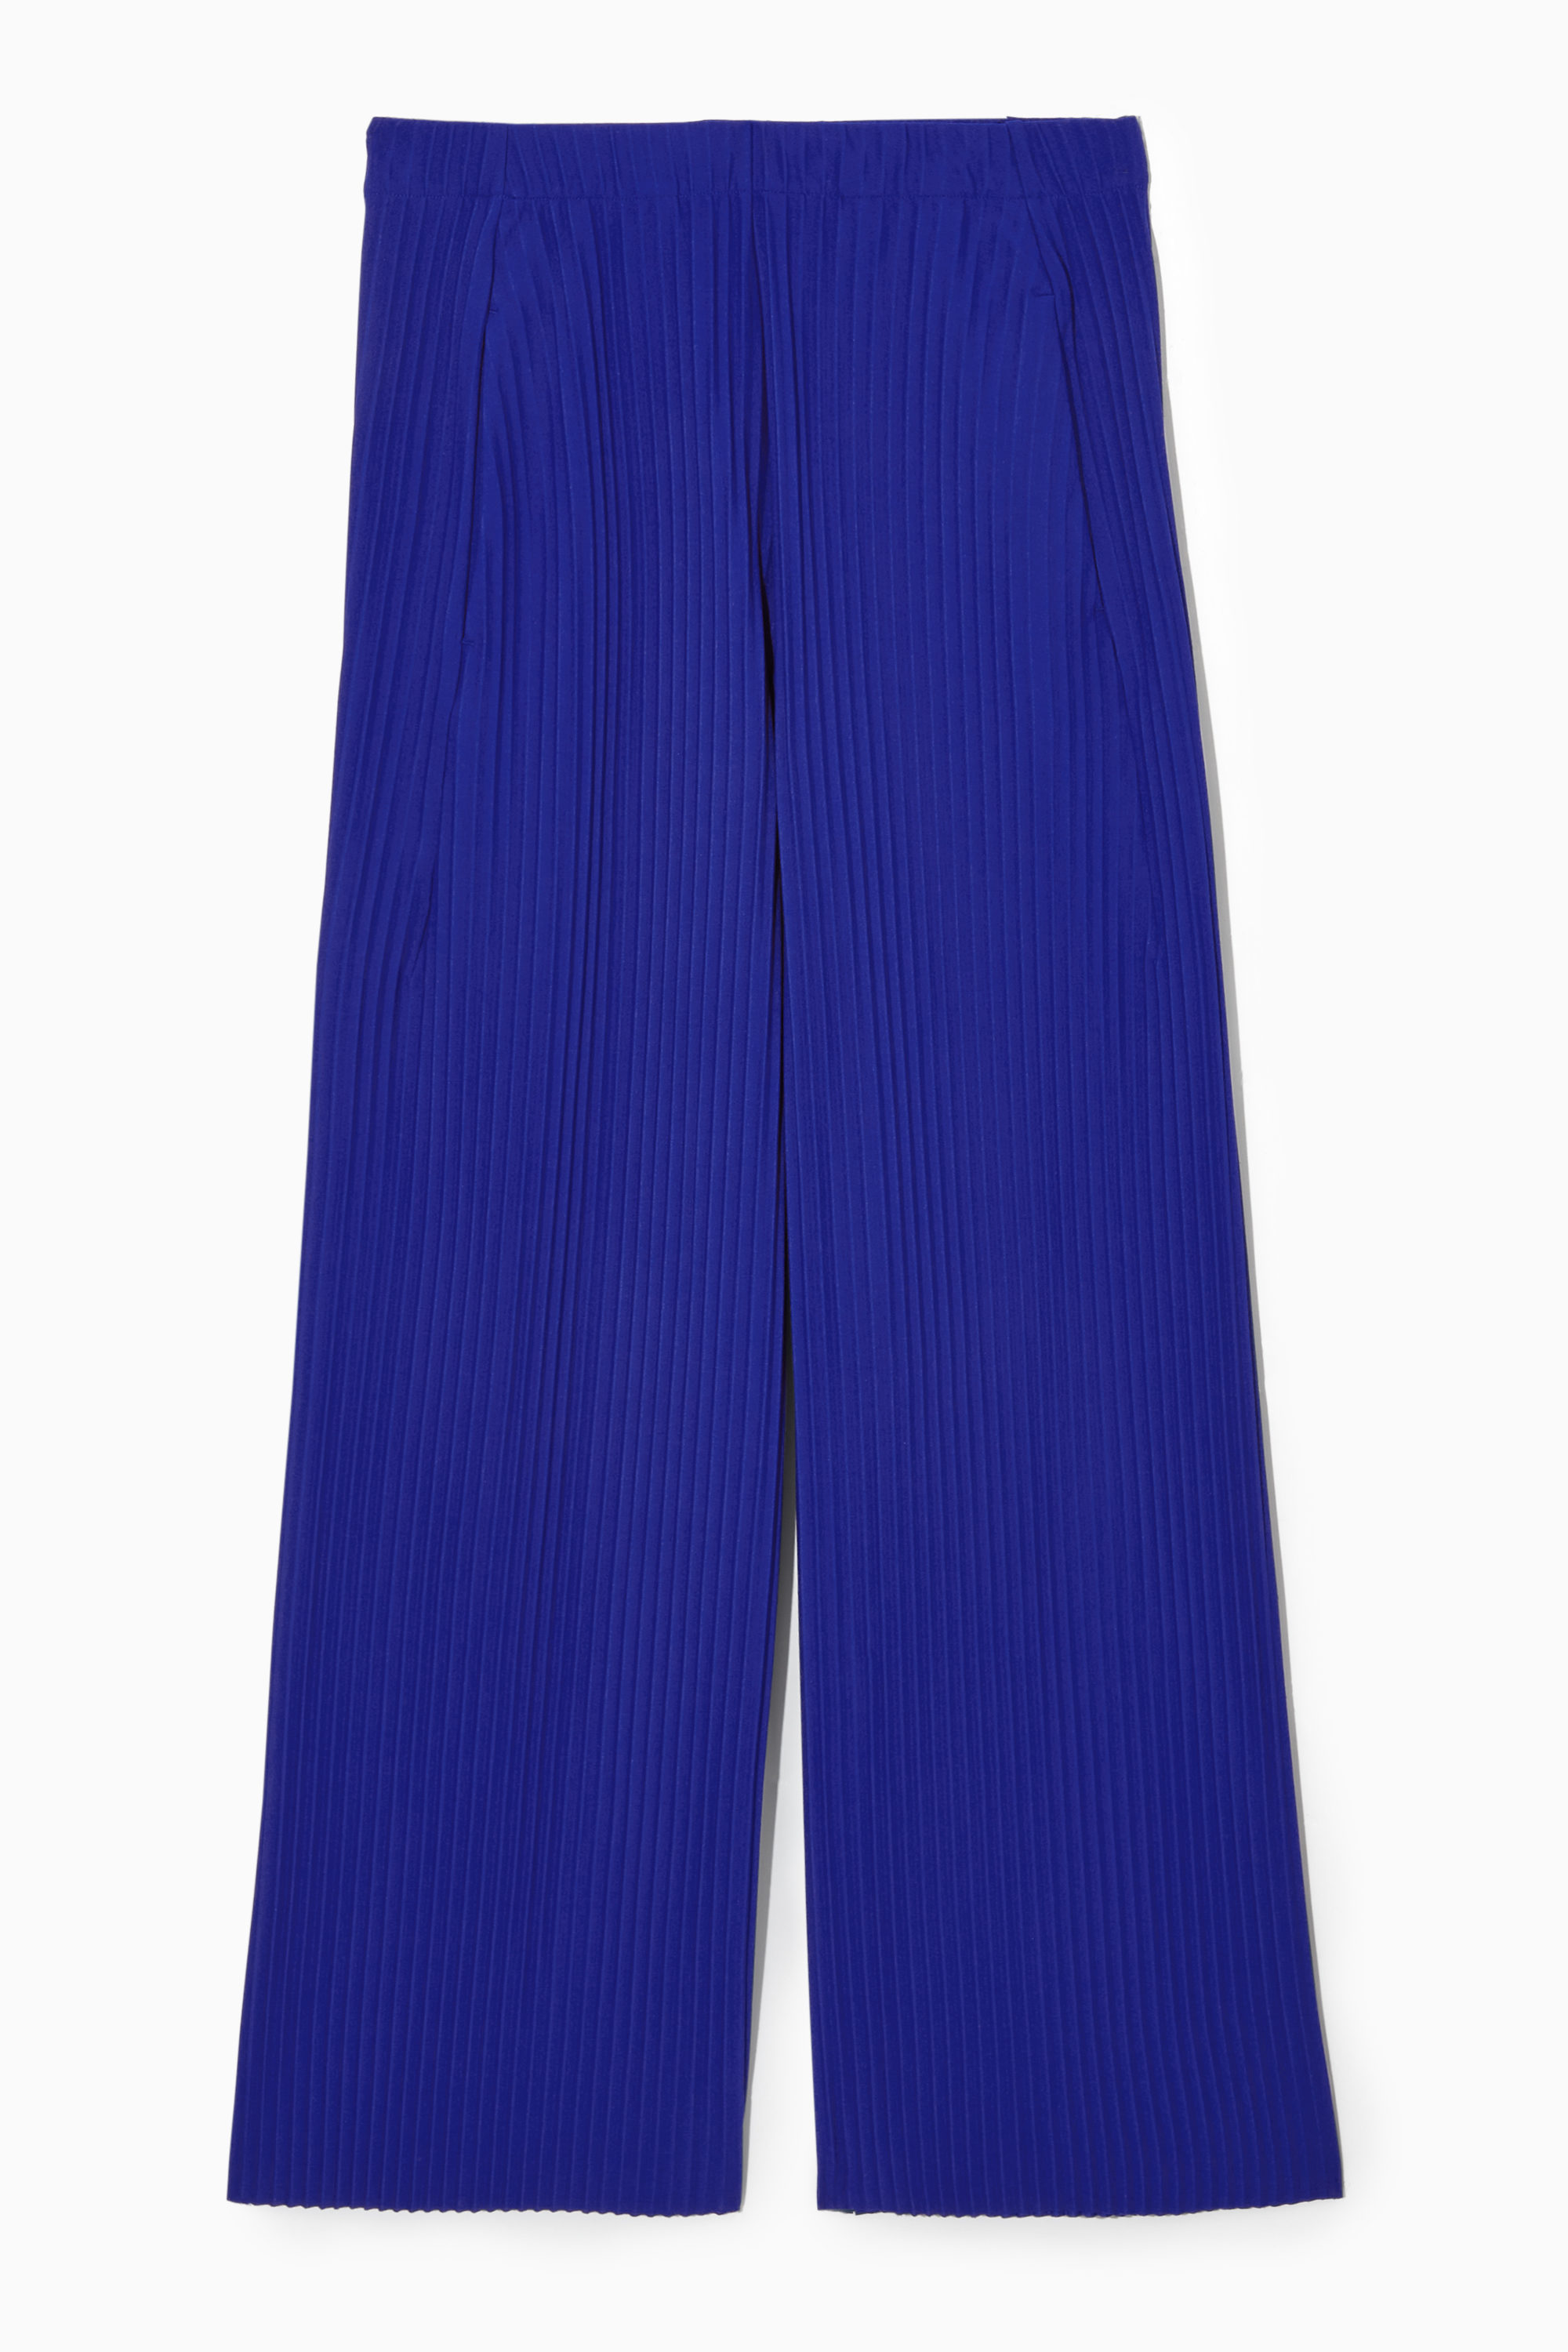 Pacelli Pleated Baggy Fit Royal Blue Dress Pants